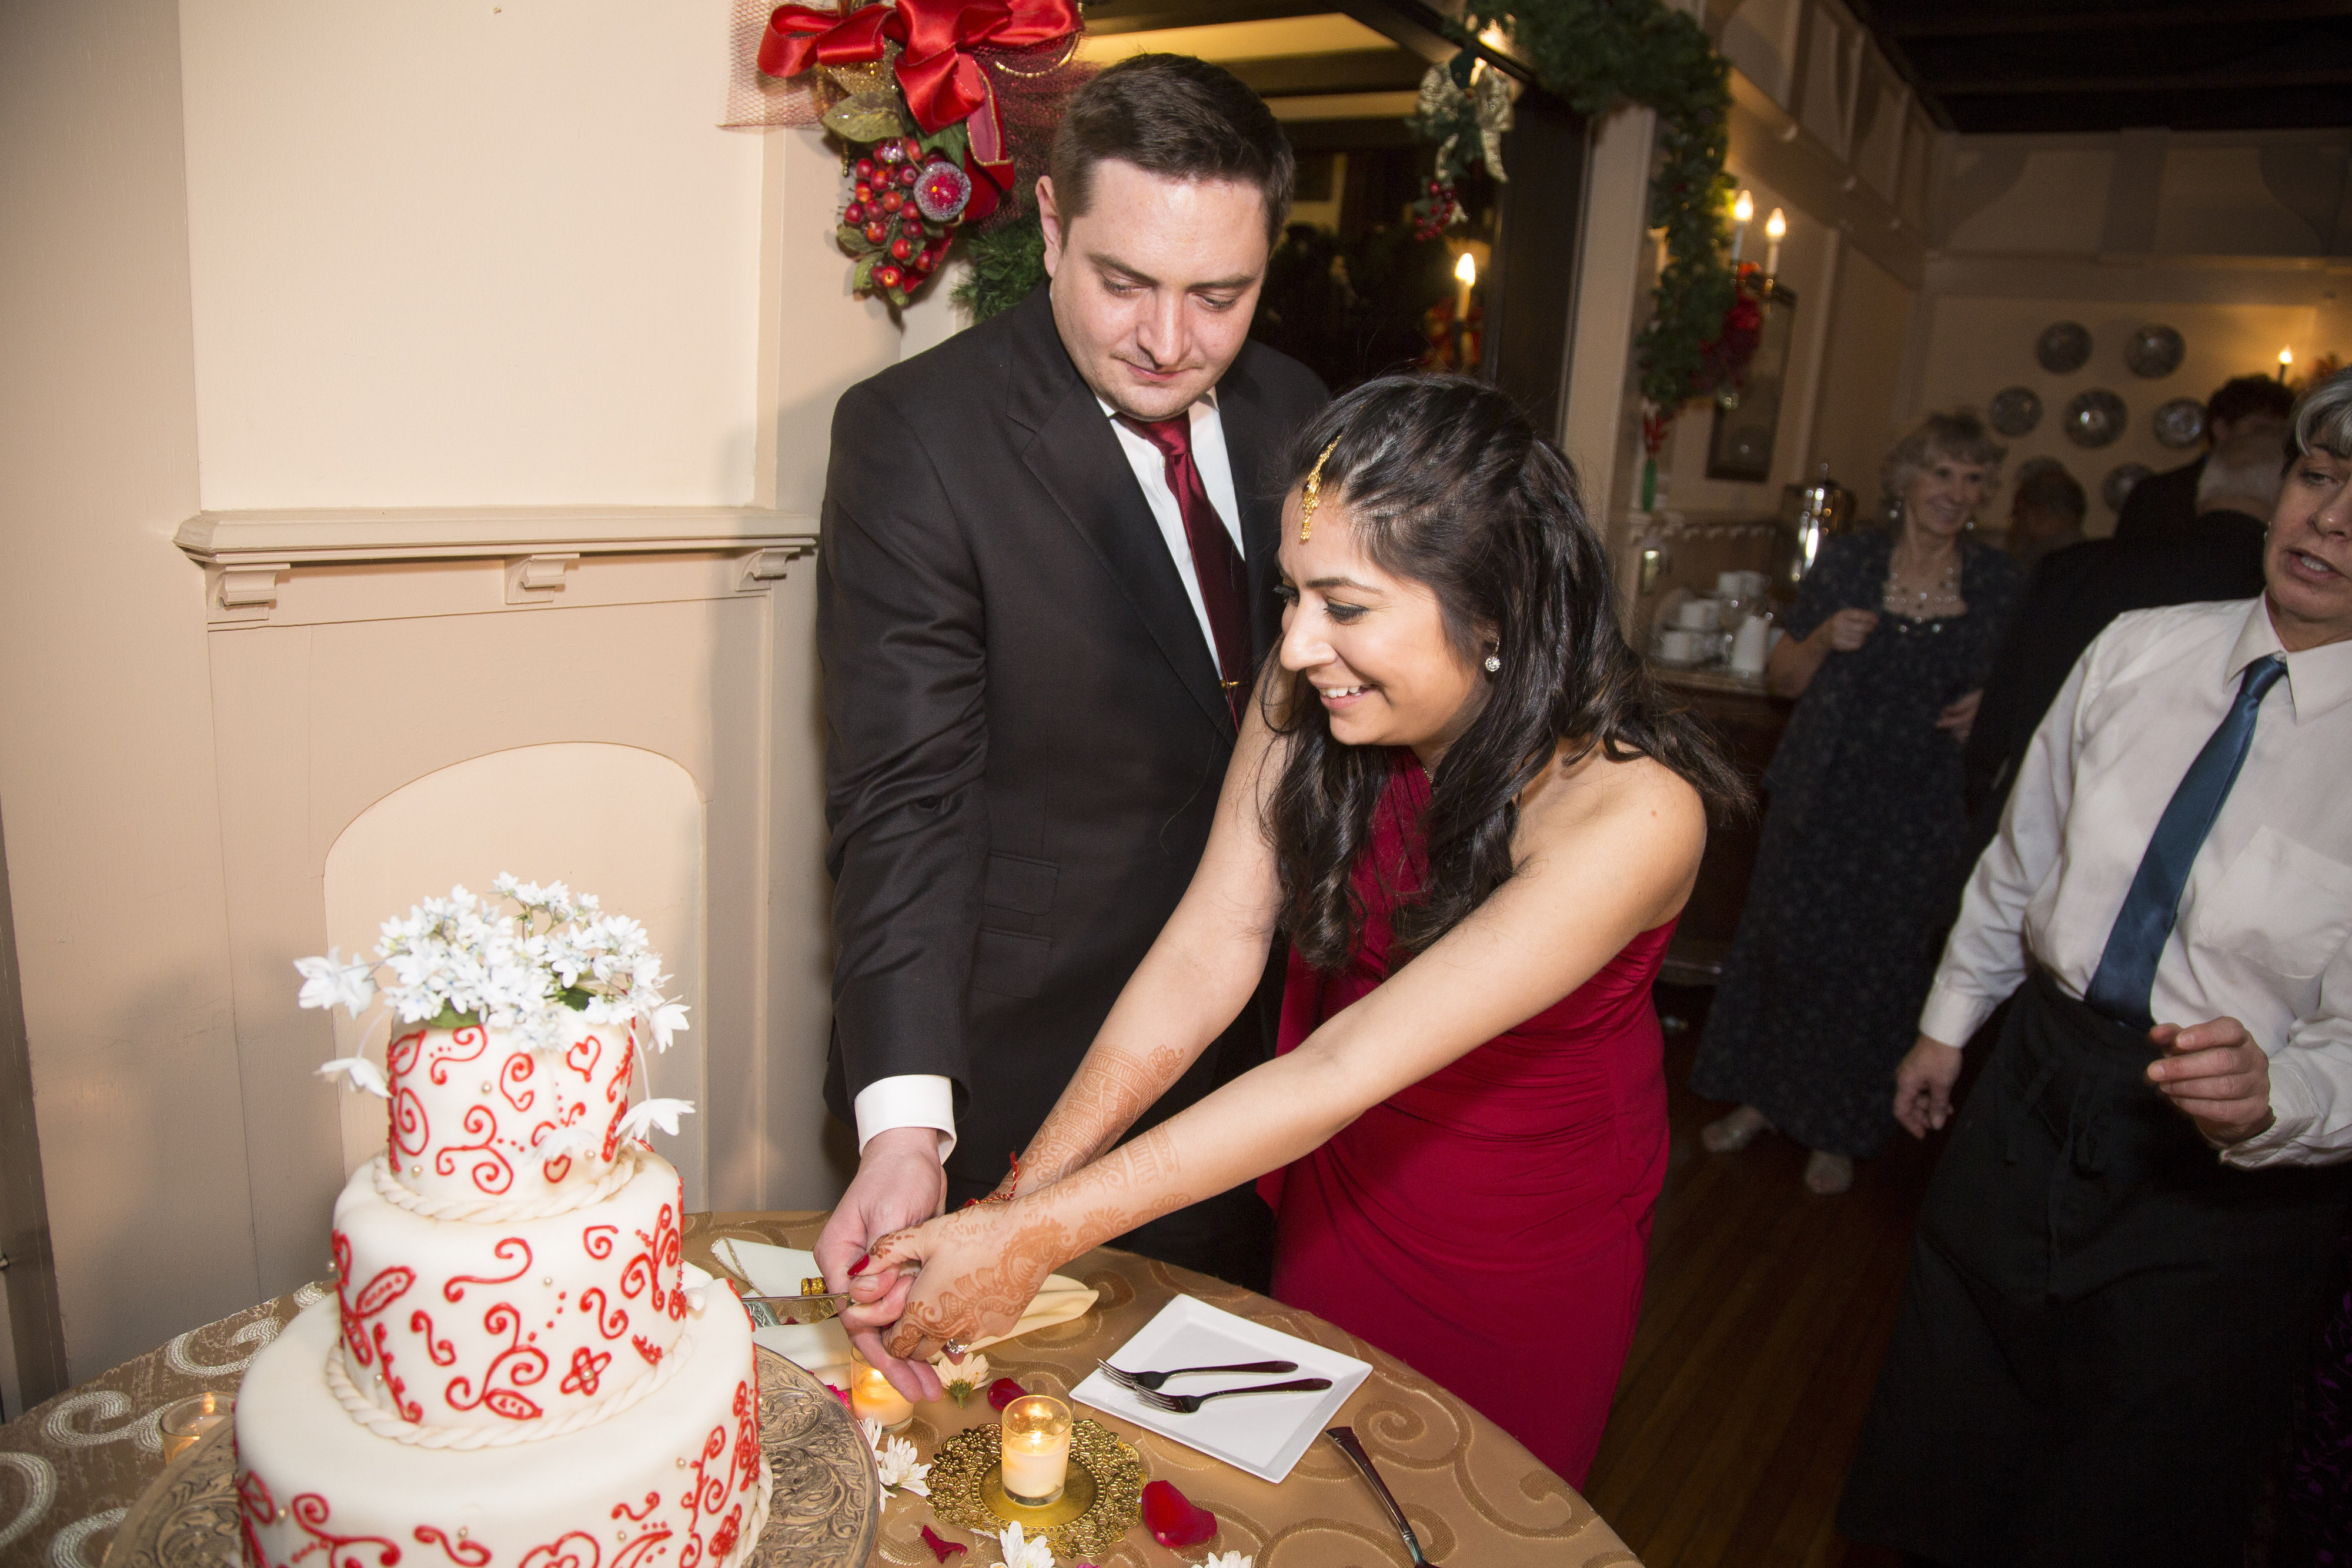 21 R&B Wedding Cake Cutting Songs To Share A Bite Of Love